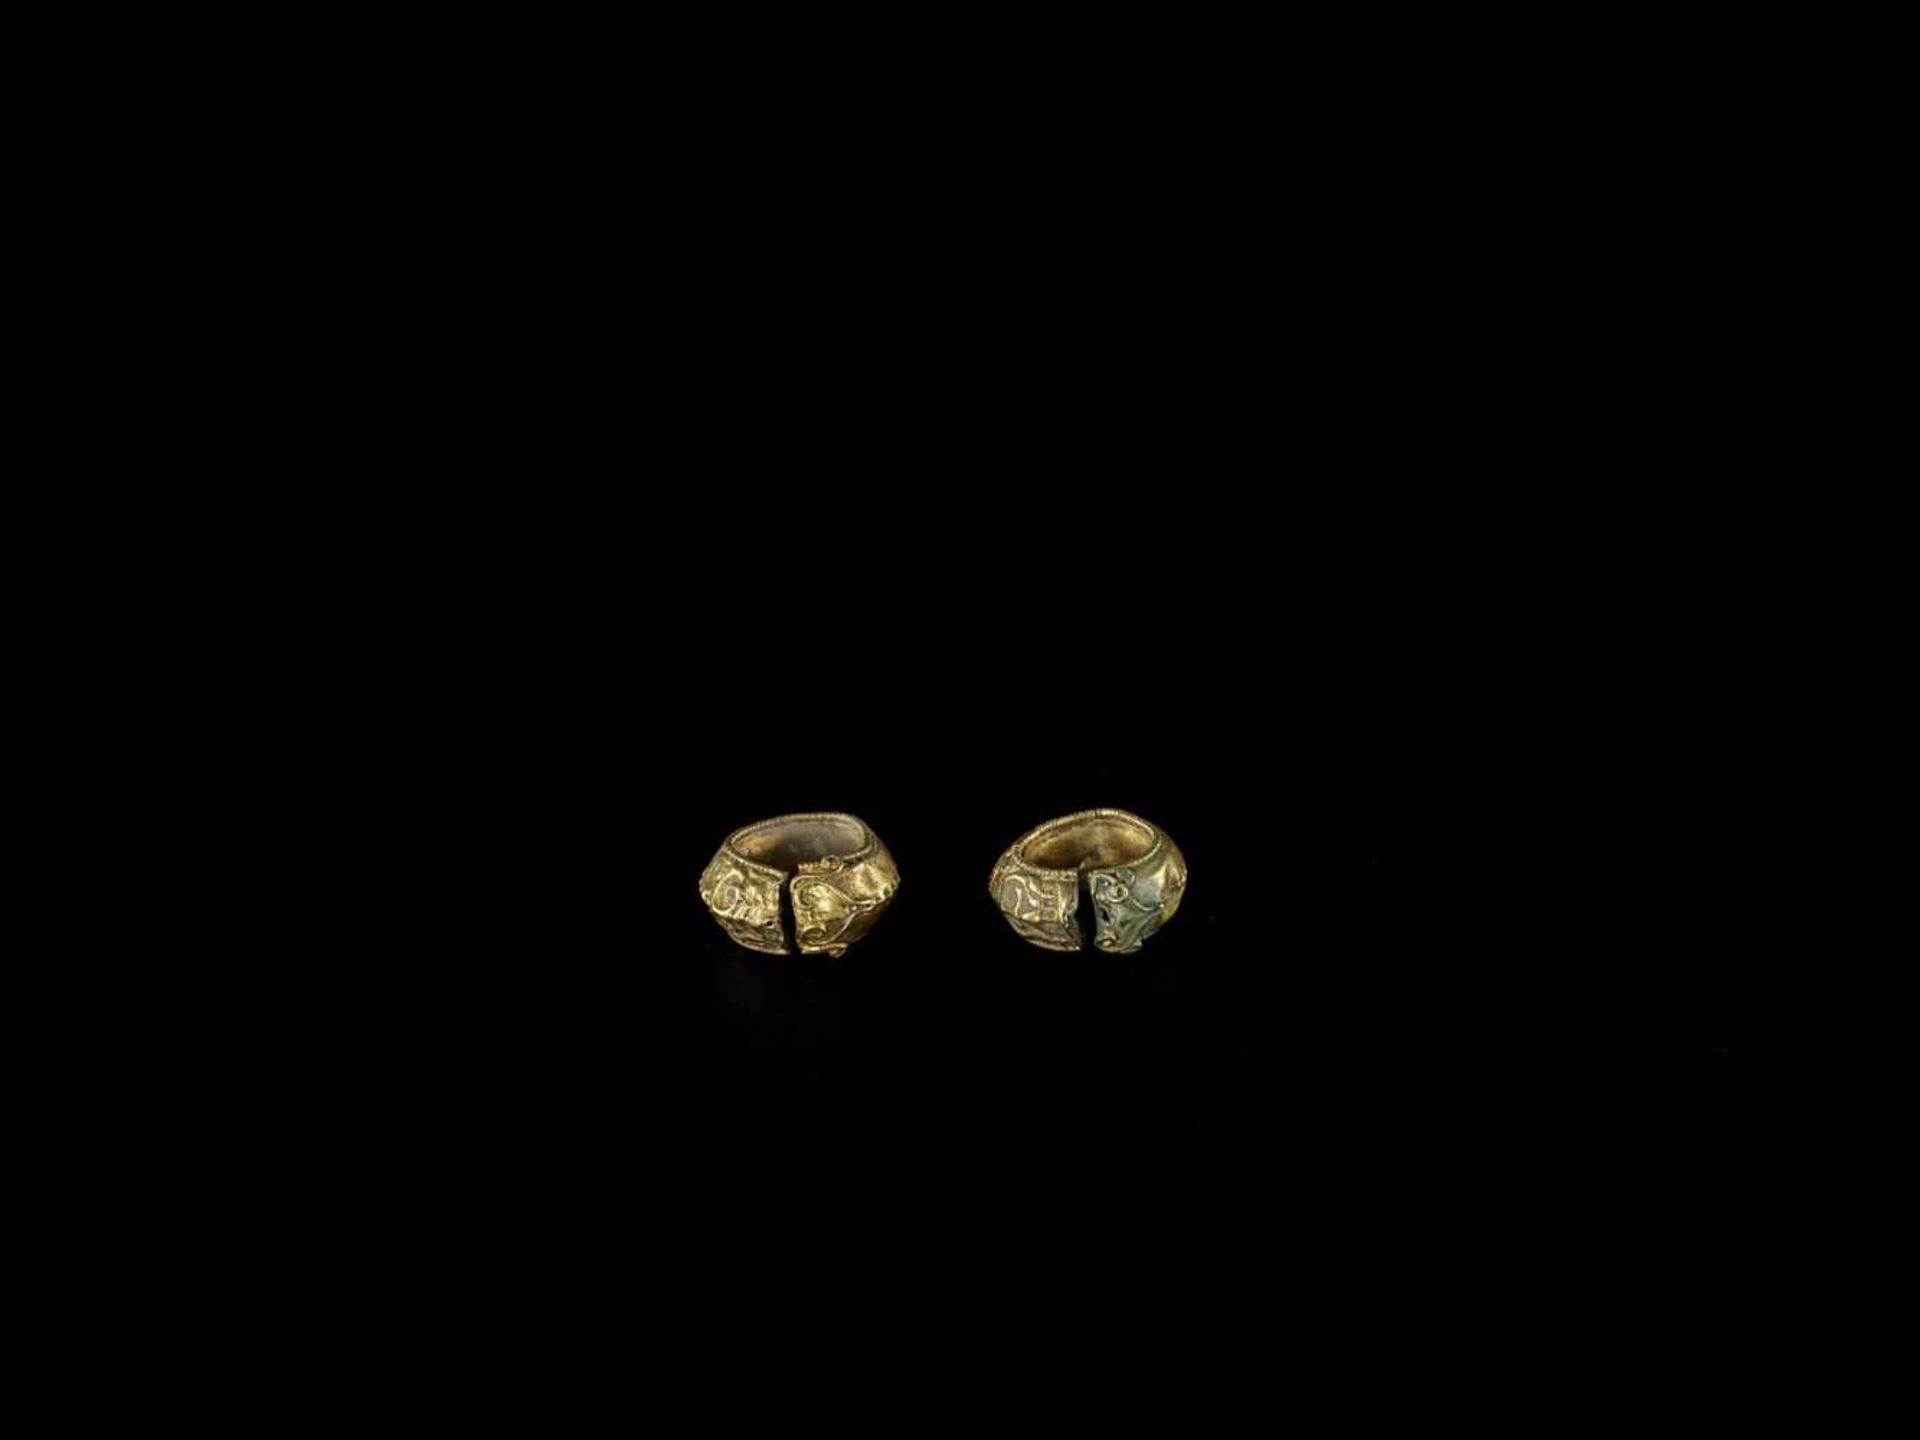 A PAIR OF CHAM REPOUSSÉ GOLD EARRINGS WITH SNAKE HEADS Champa, 12th – 14th century. The earrings